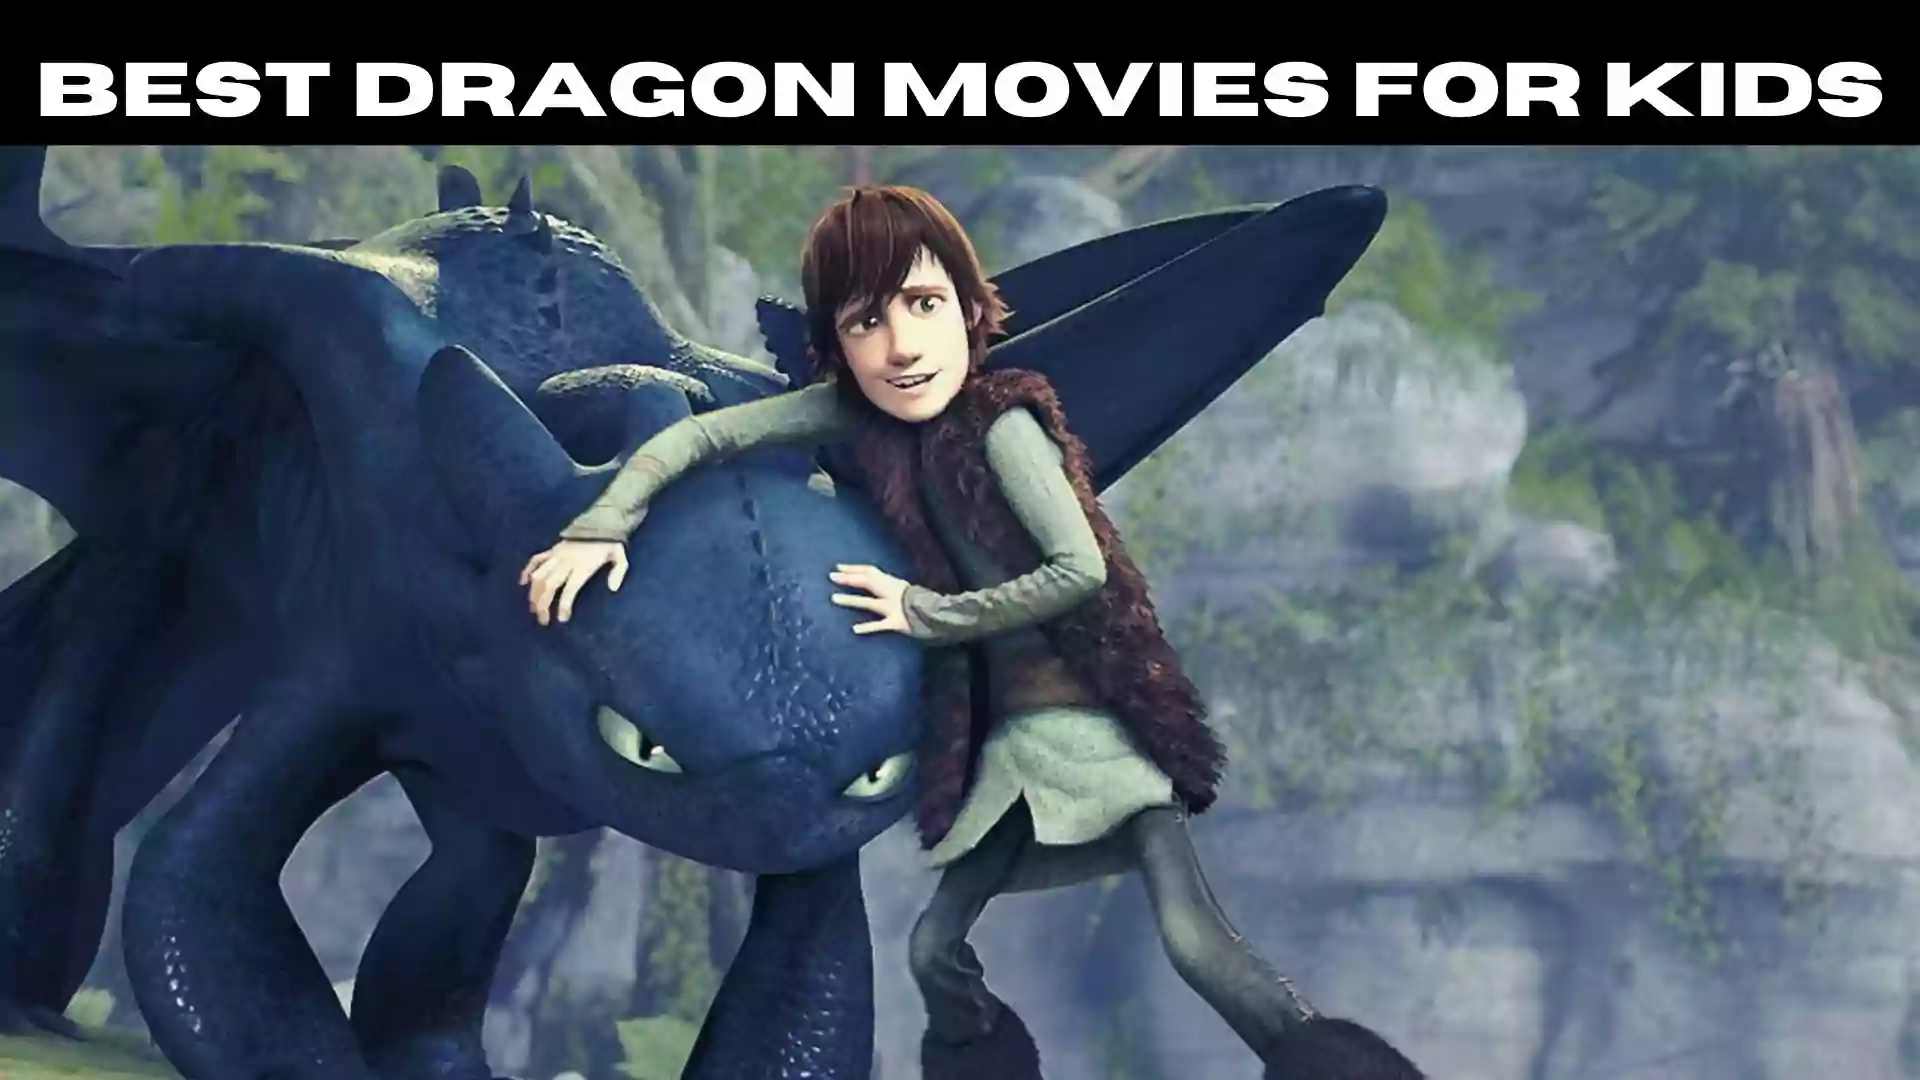 Best Dragon Movies for Kids